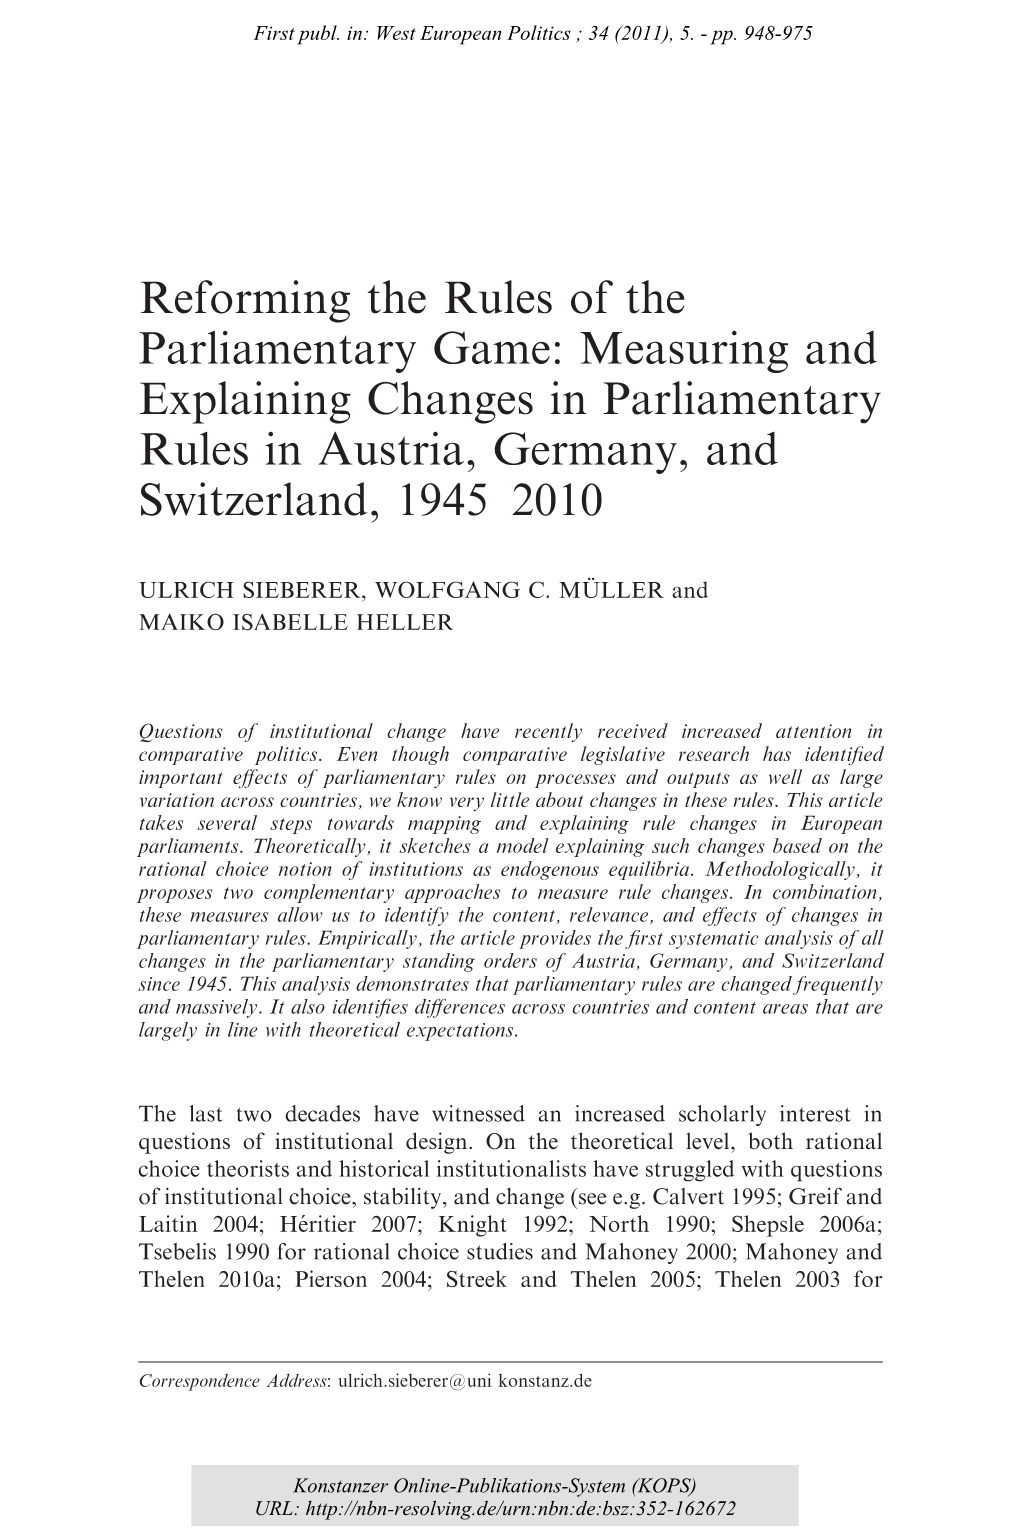 Reforming the Rules of the Parliamentary Game : Measuring and Explaining Changes in Parliamentary Rules in Austria, Germany